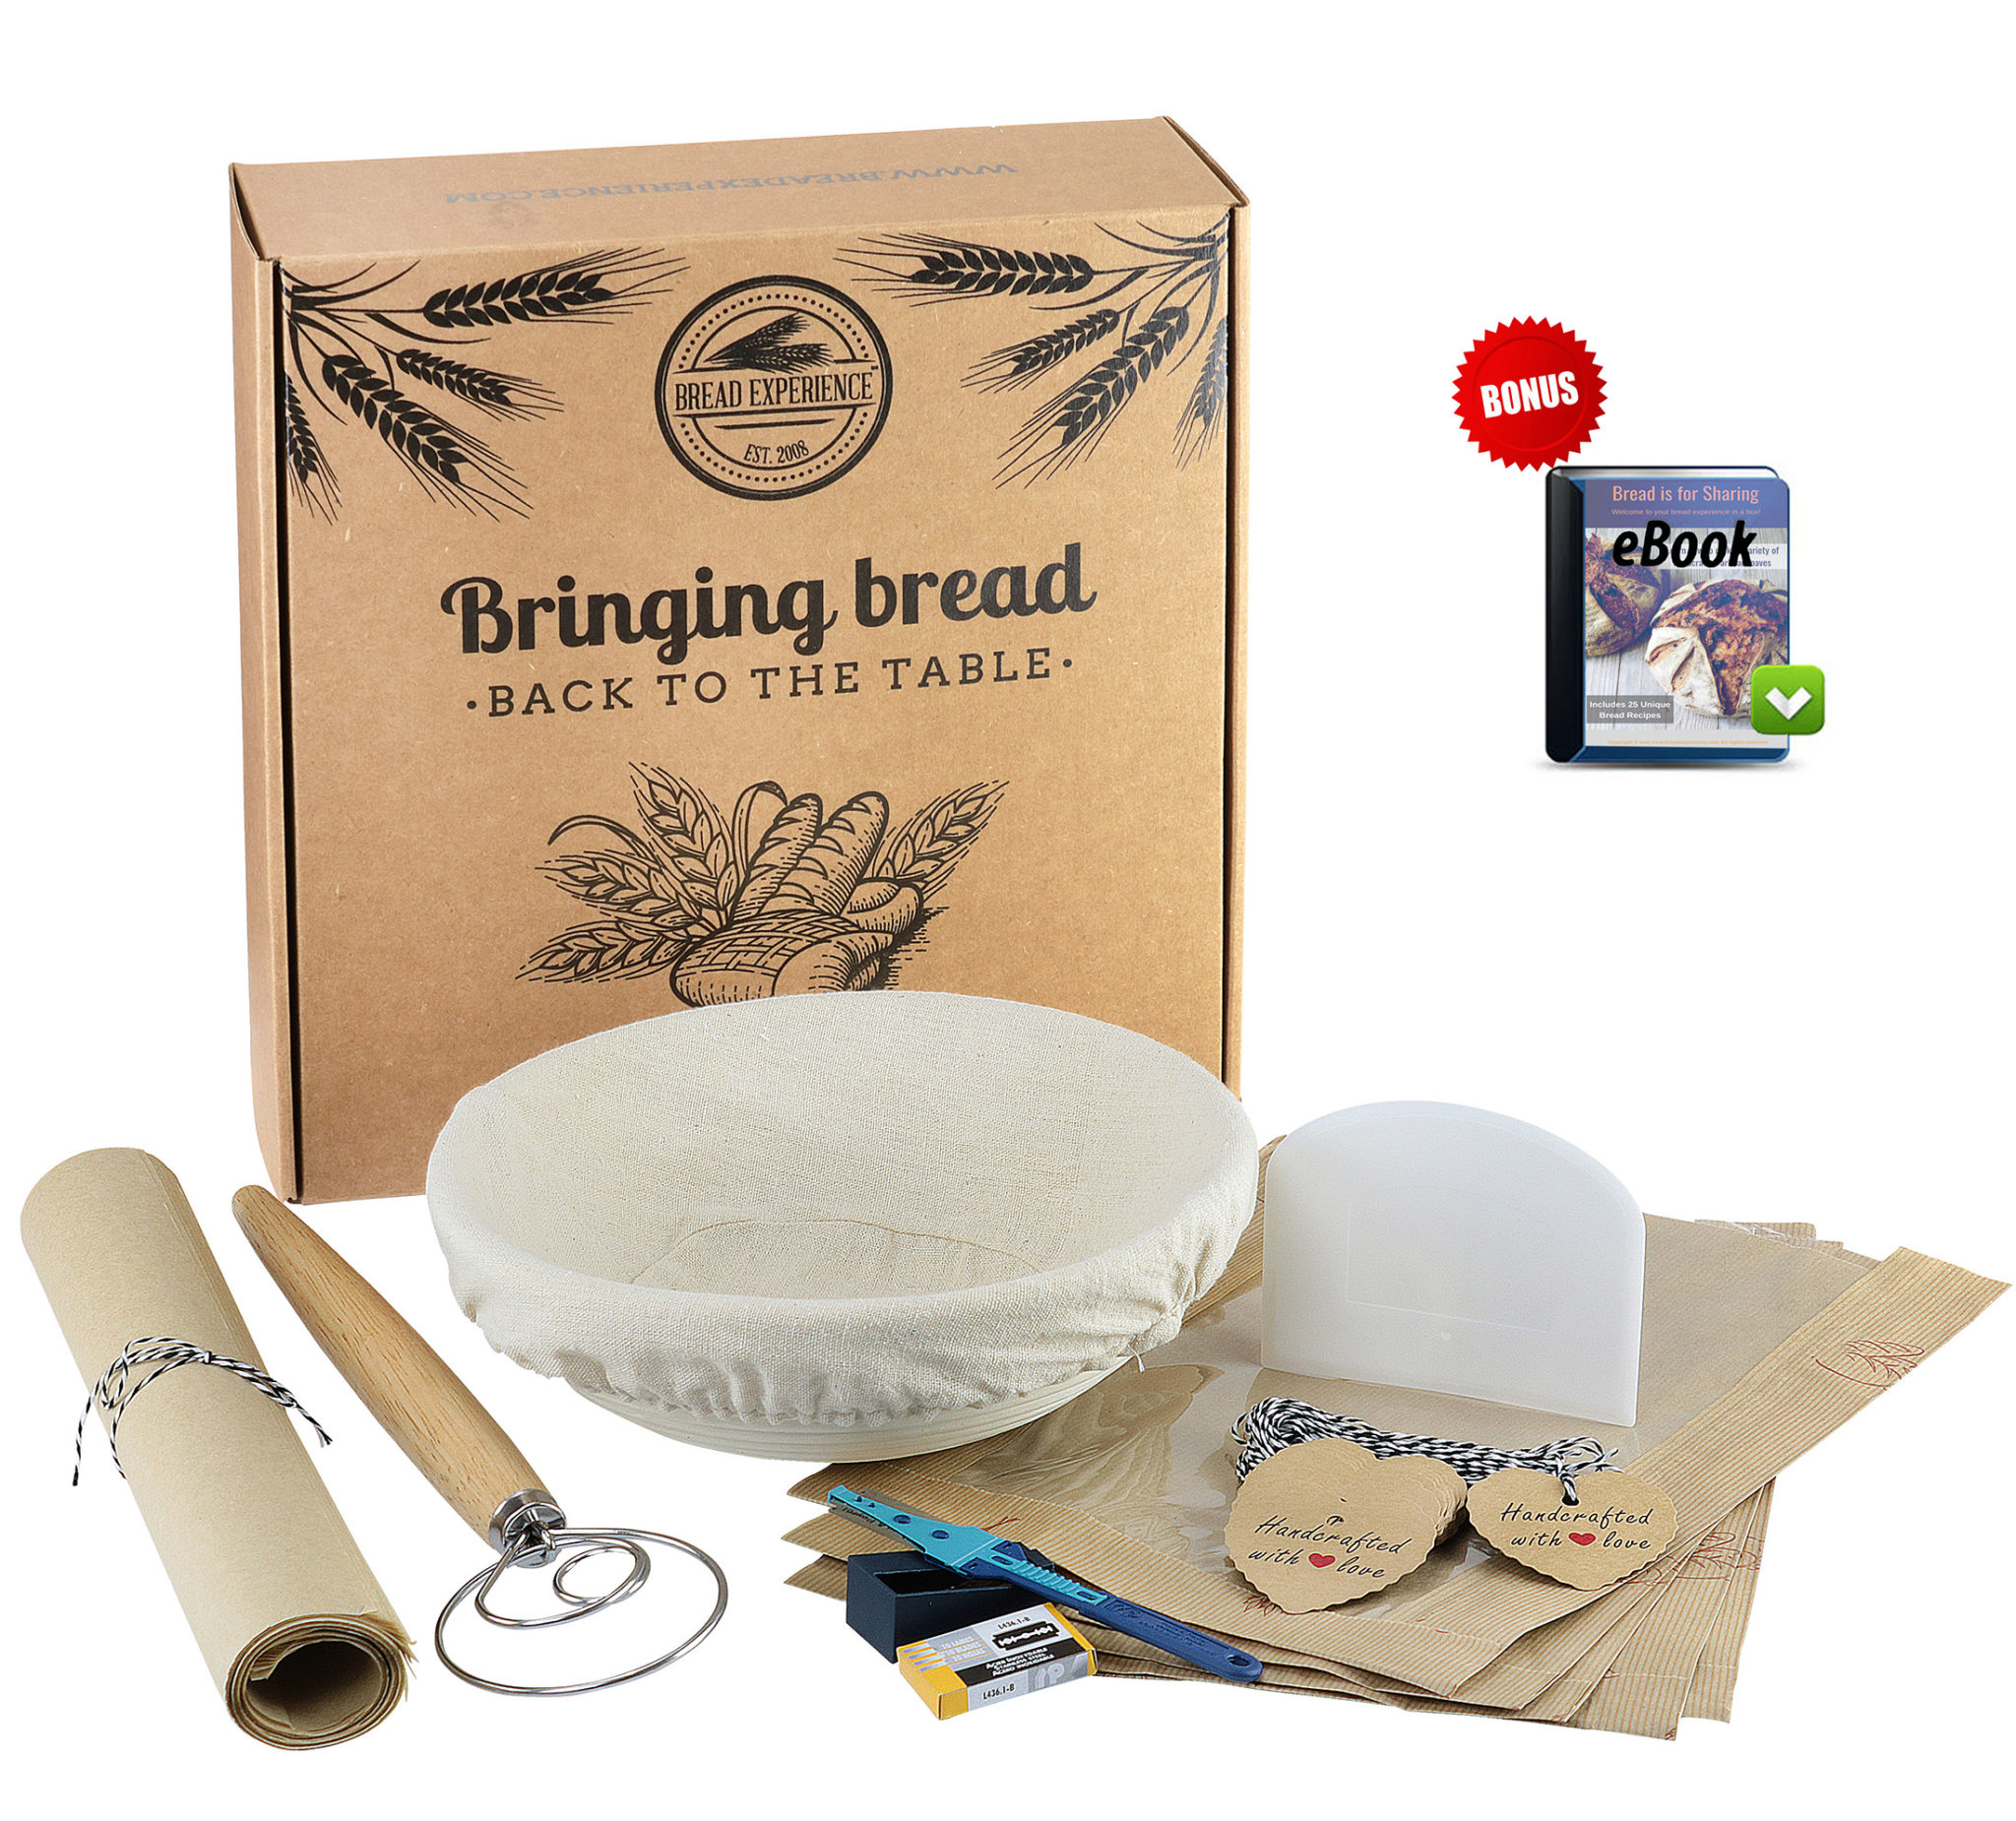 Bread Sharing Box by Bread Experience